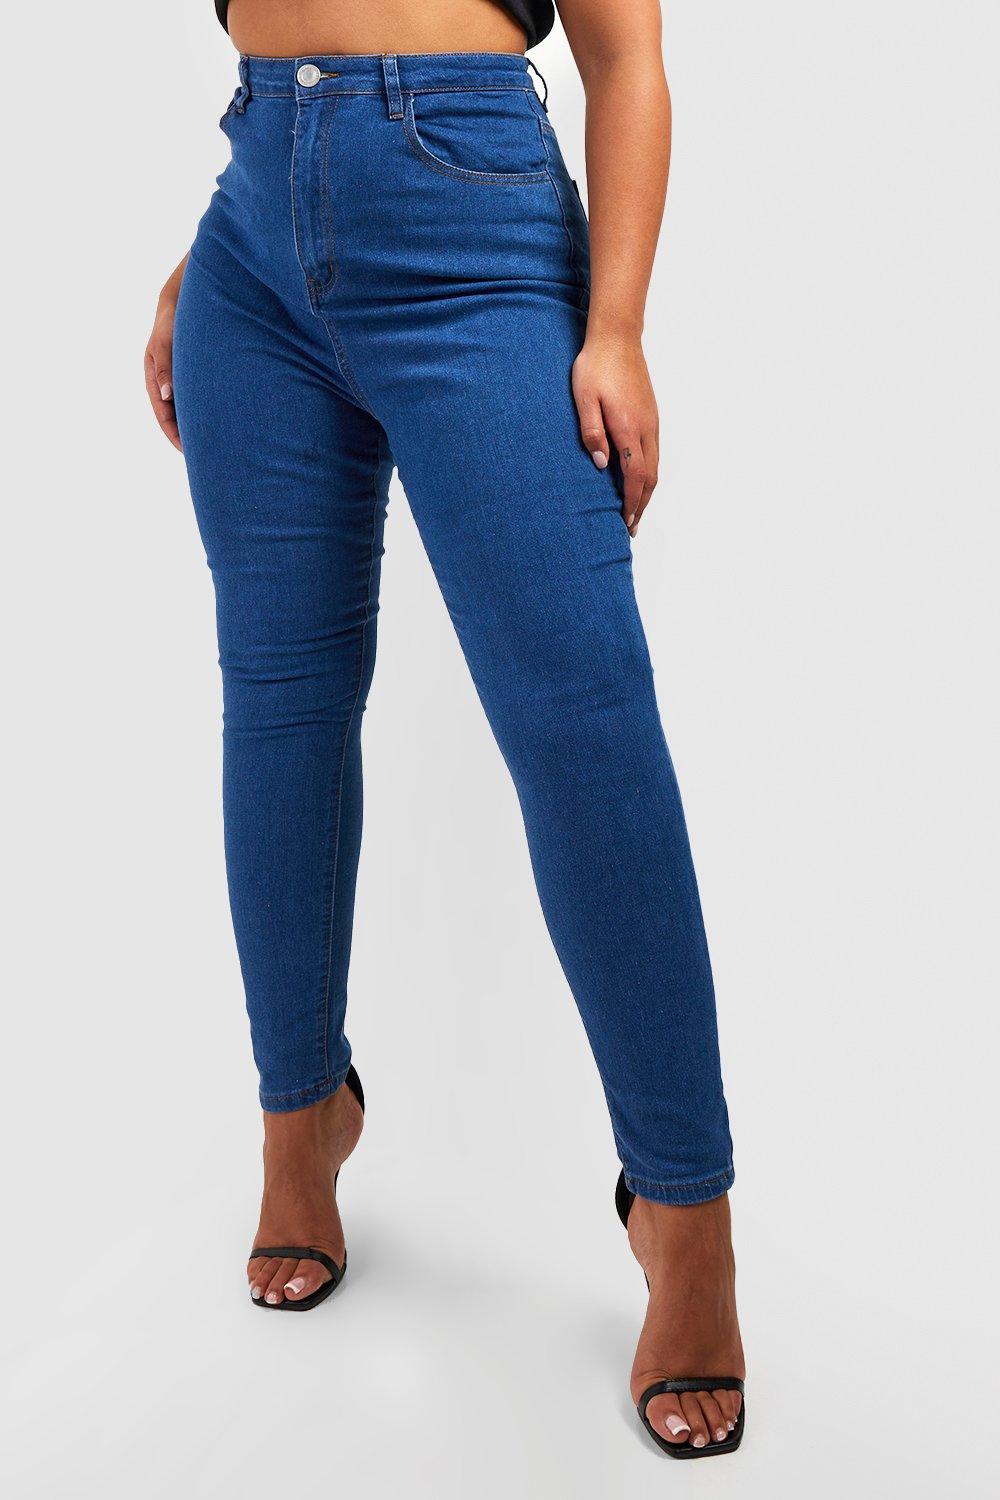 Womens Clothing Jeans Skinny jeans Boohoo Denim Plus 5 Pocket Stretch Skinny Jeans in Mid Blue Blue 